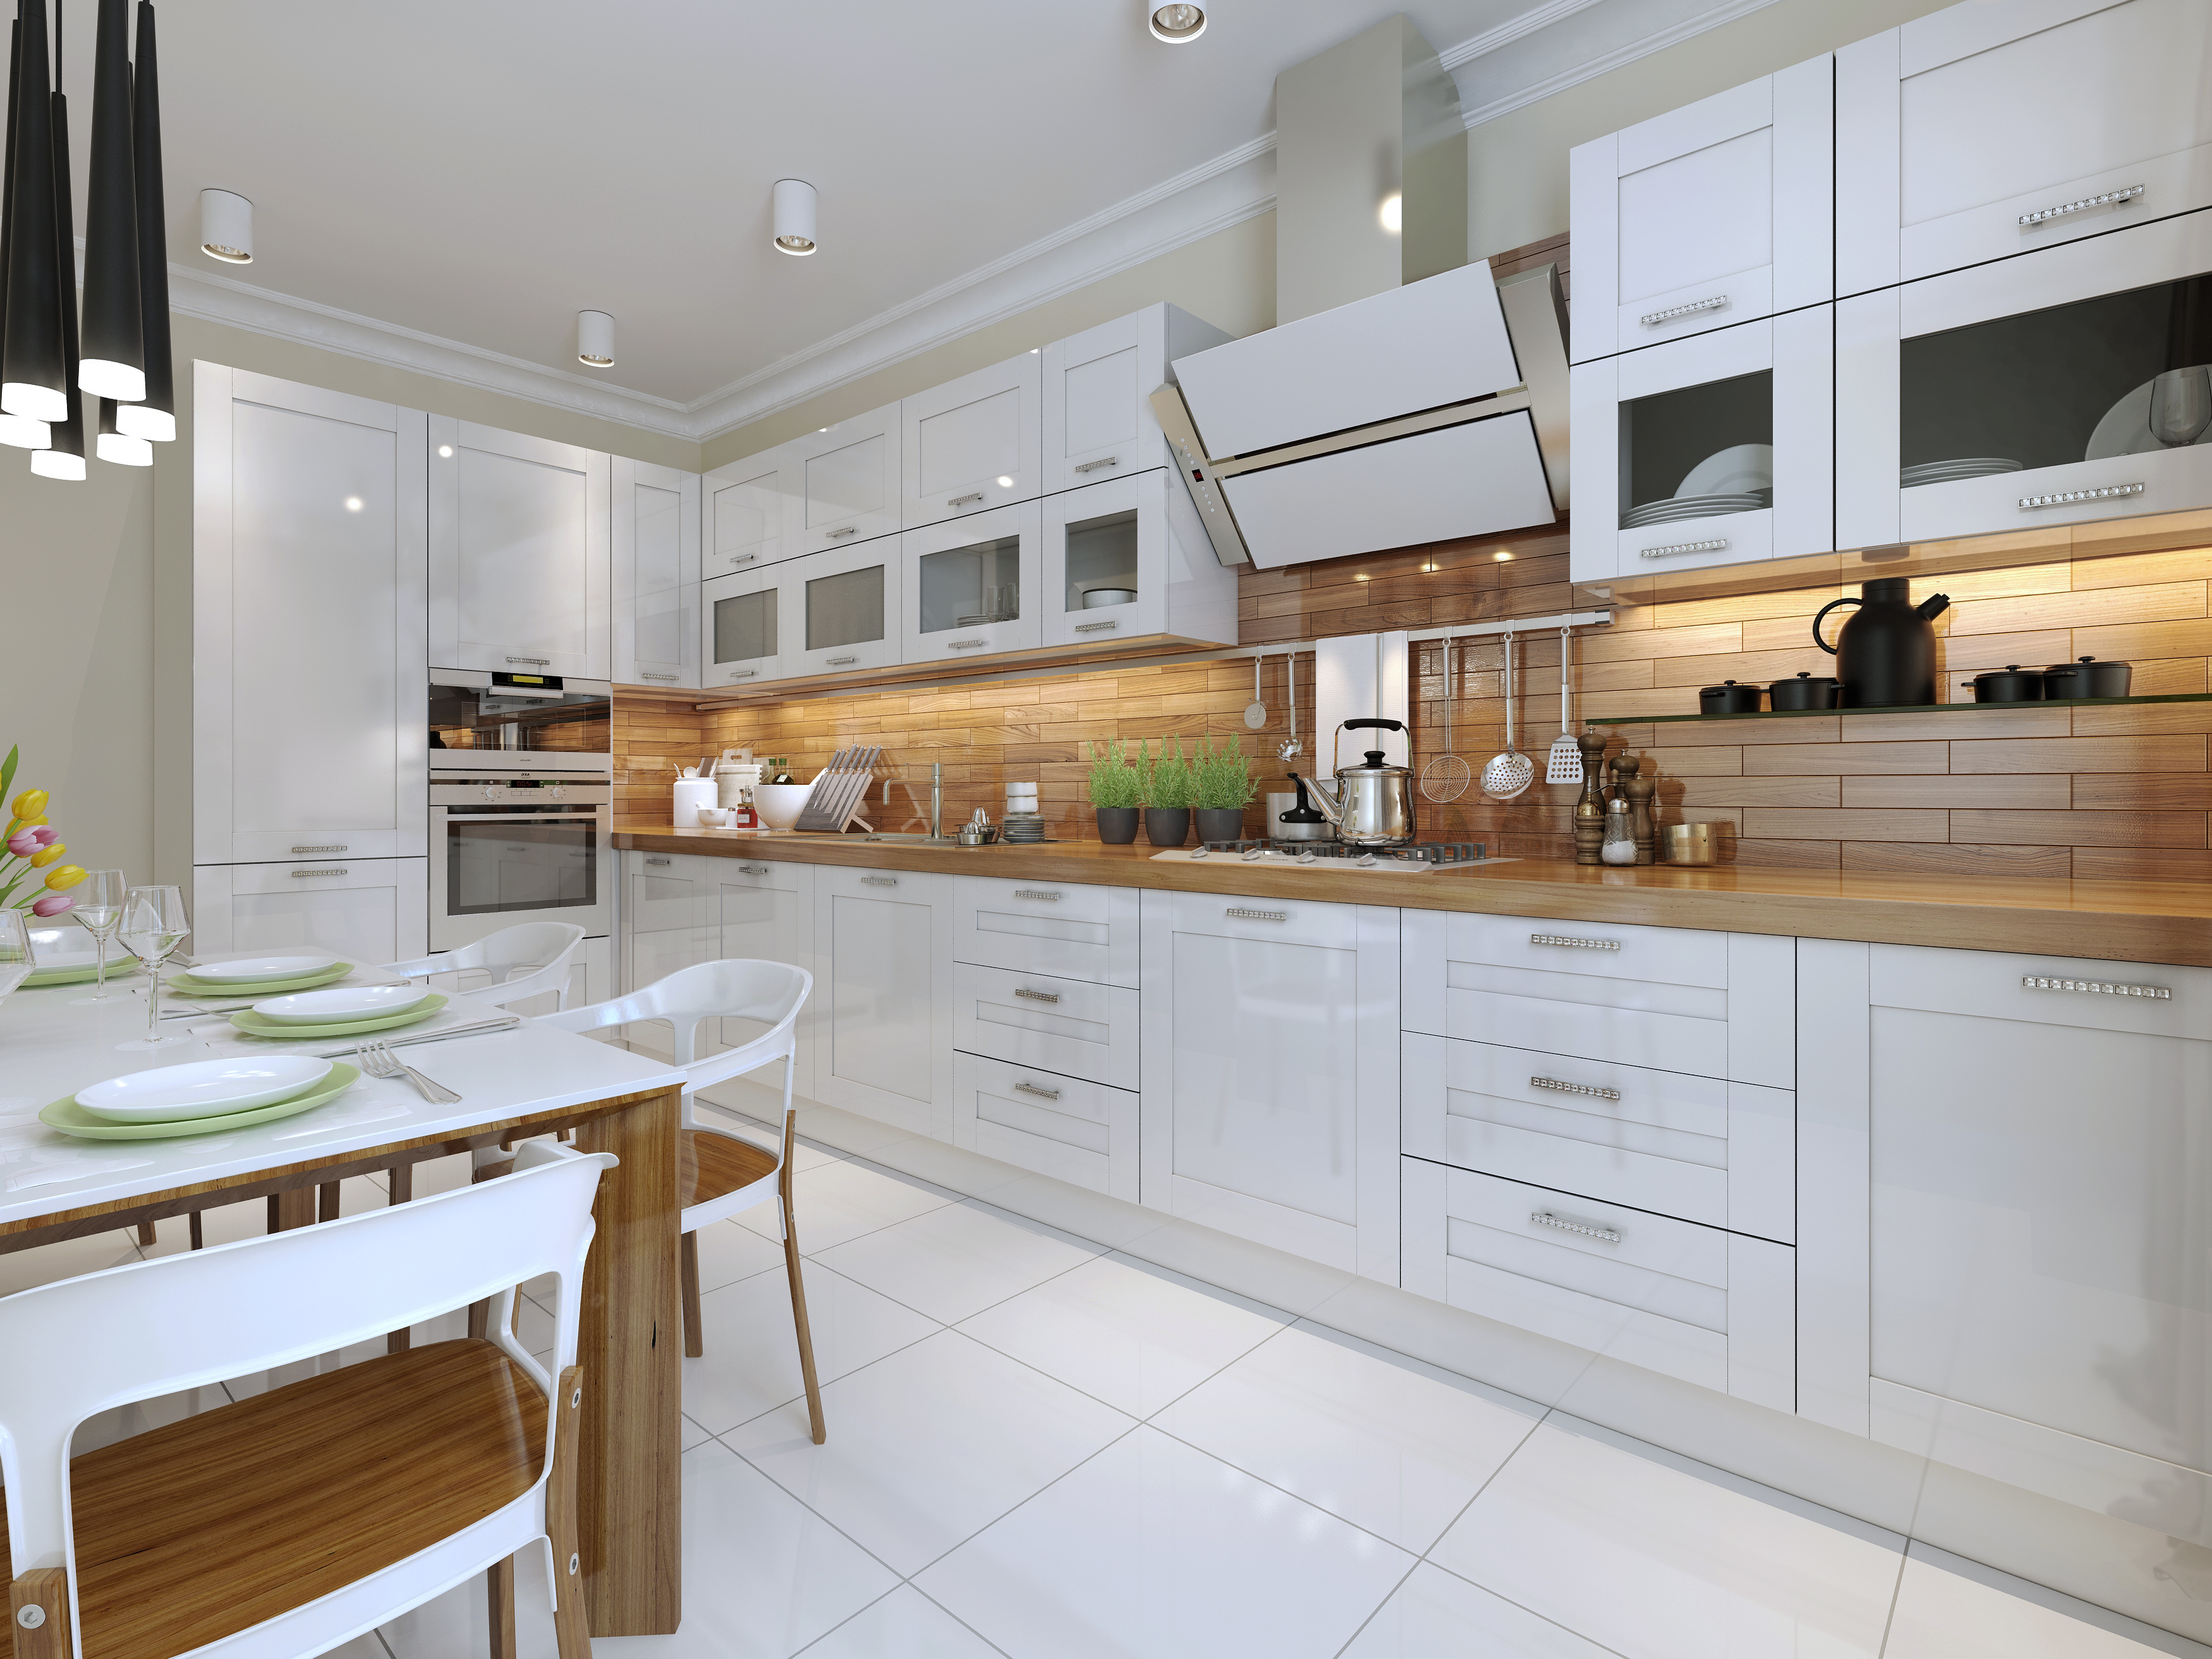 TRADITIONAL KITCHENS FOR SUSSEX, SURREY